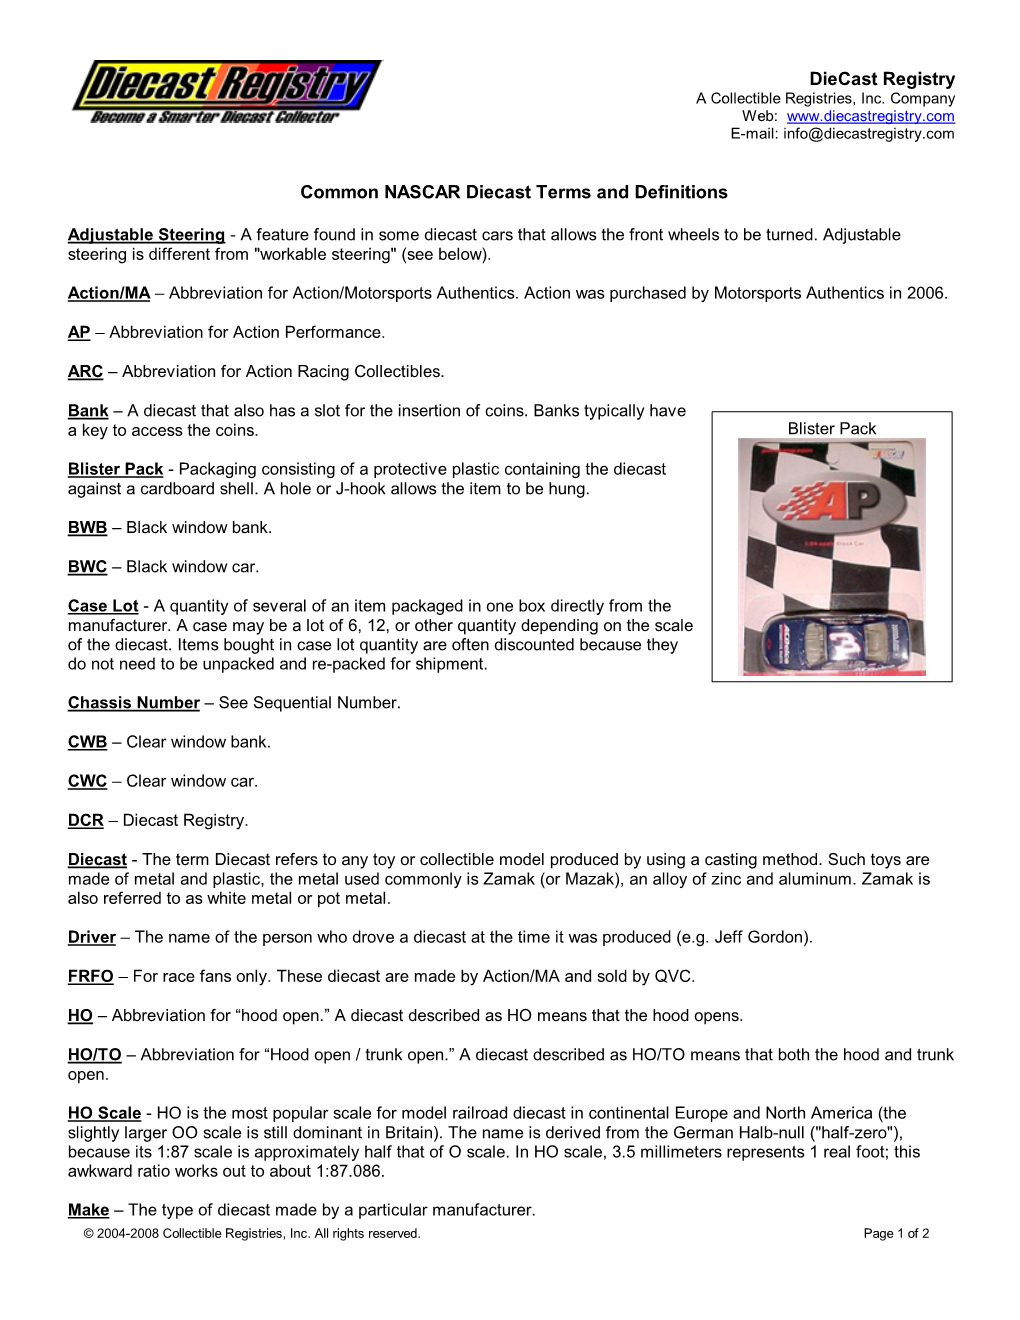 Diecast Registry the #1 Racing NASCAR Diecast Price Guide